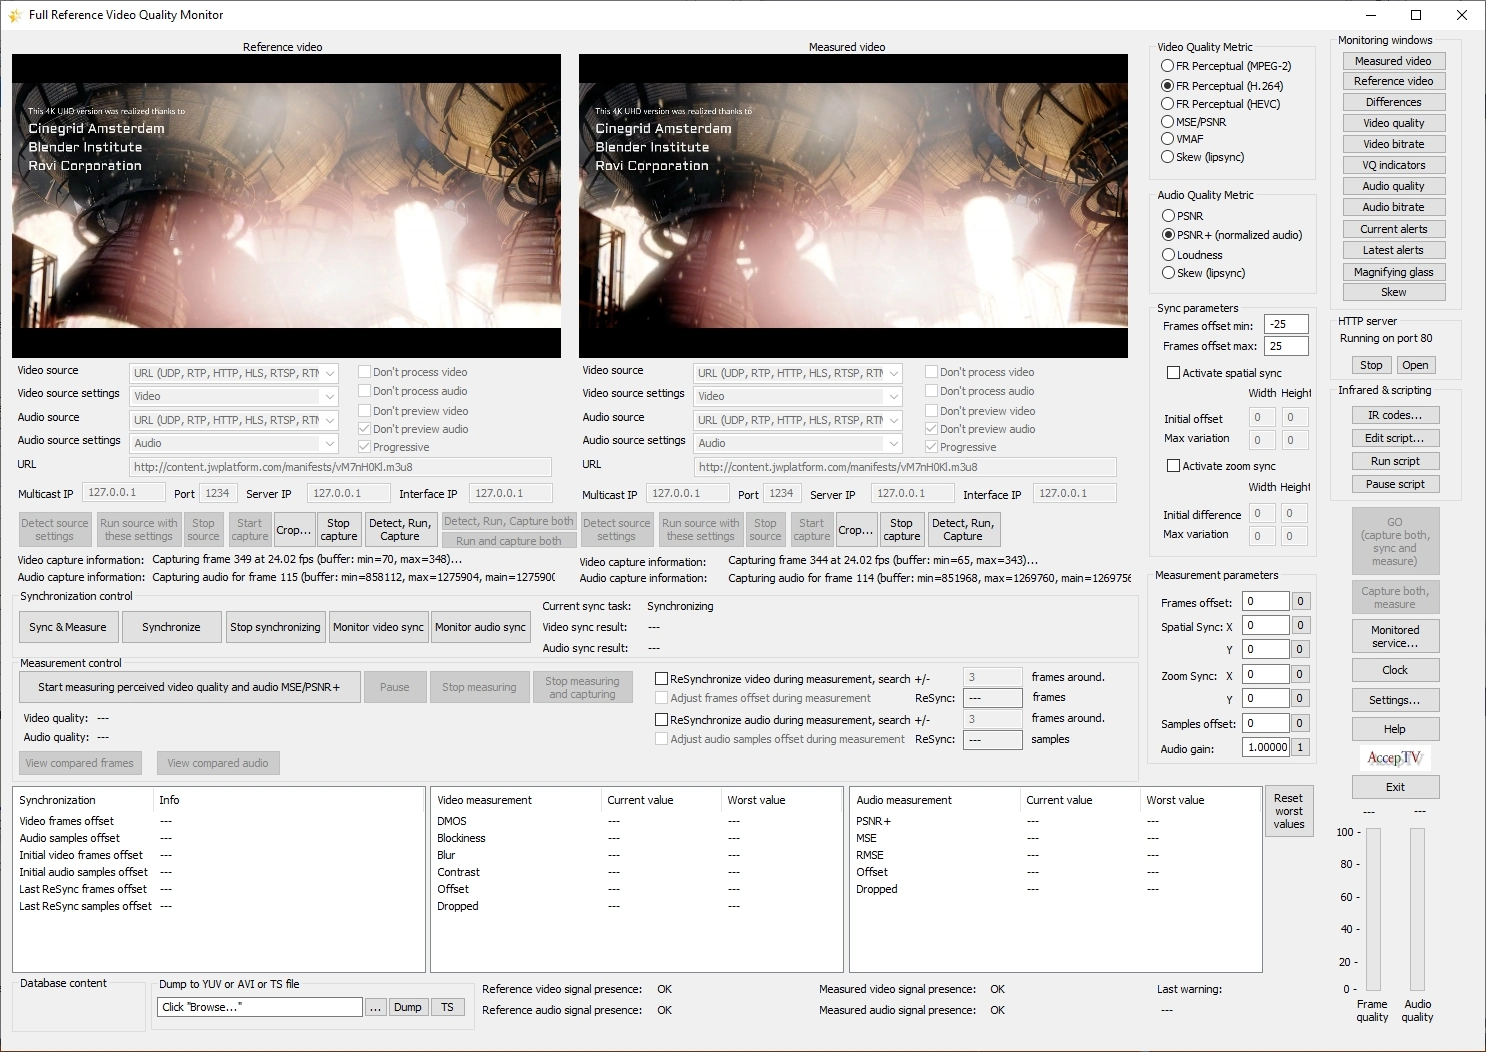 Screenshot of Full Reference Video Quality Monitor #2